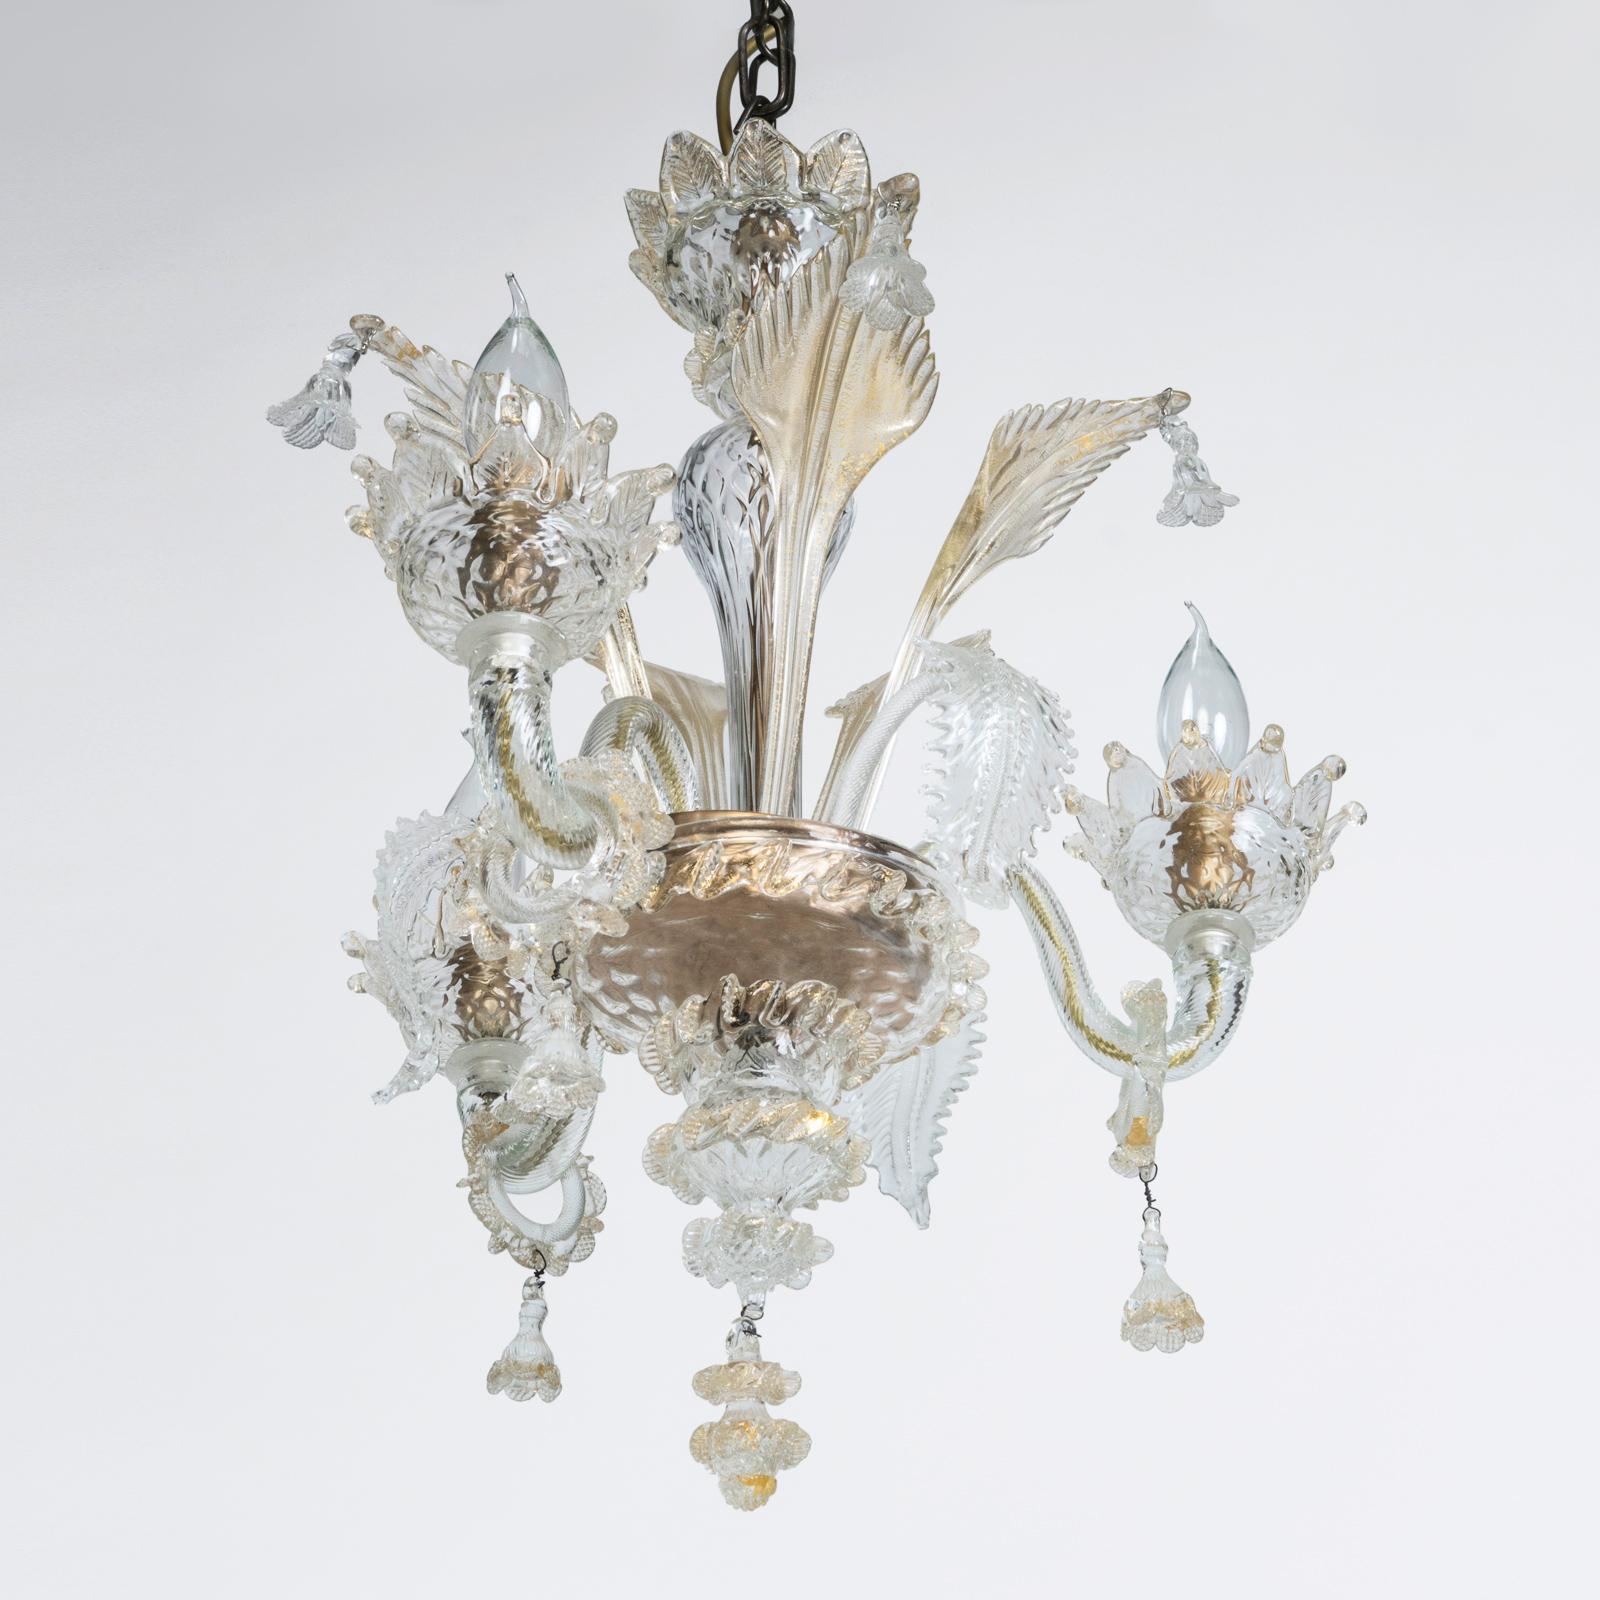 Discover this exquisite petite Murano Glass Chandelier, a true marvel of craftsmanship. With three radiant lights, it not only illuminates your space but also infuses it with a delightful blend of playfulness and sophistication.

Each of these